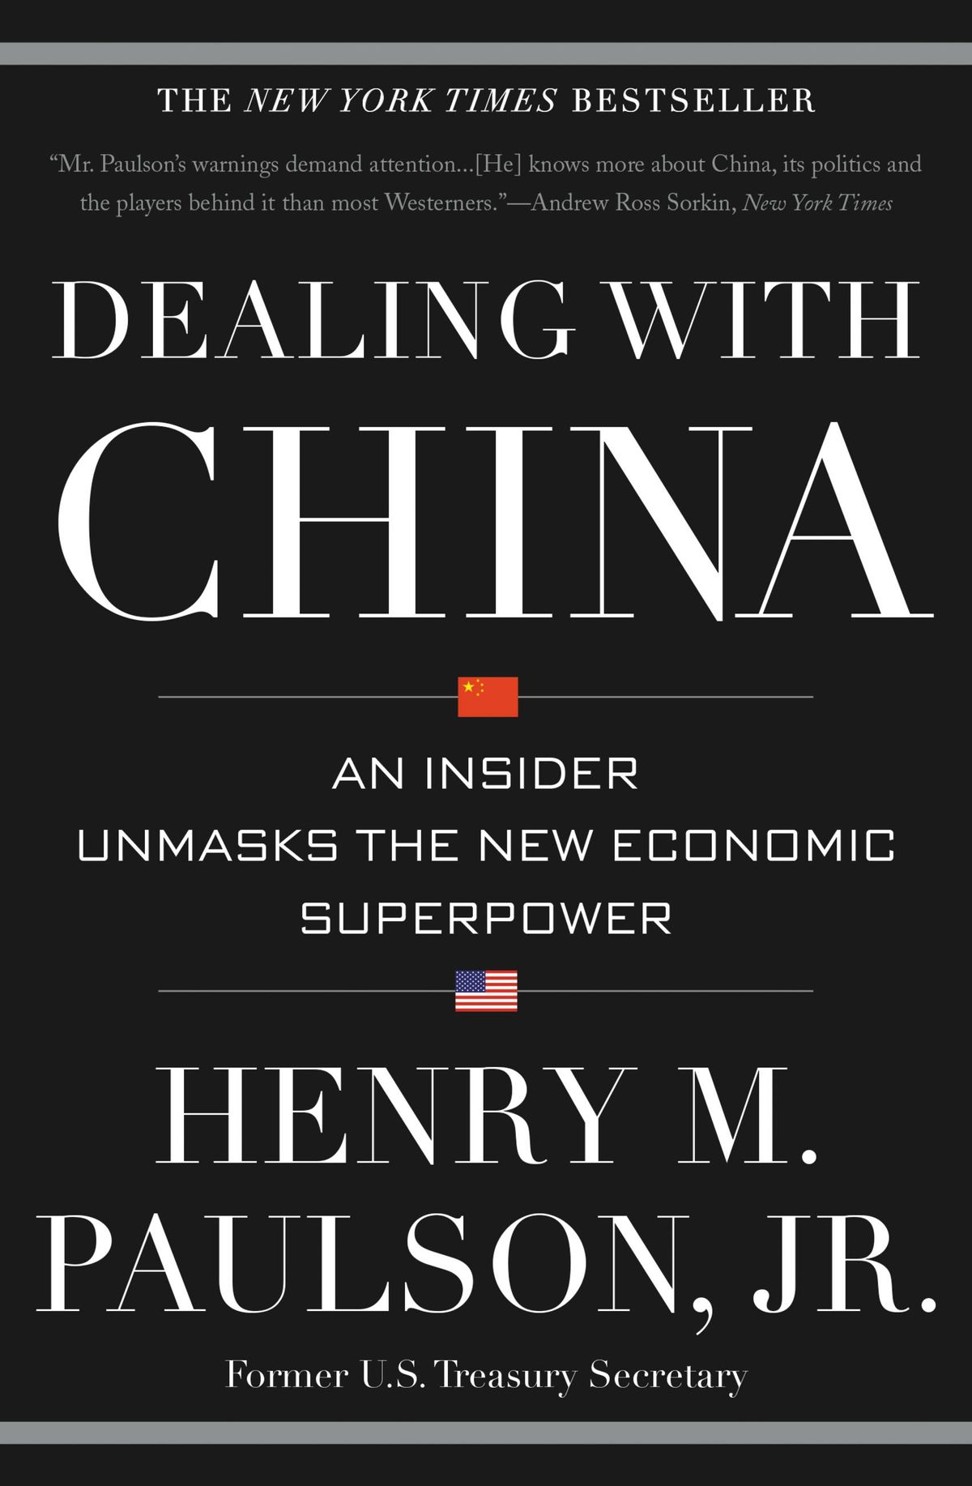 Dealing with China, by Henry M. Paulson Jnr.